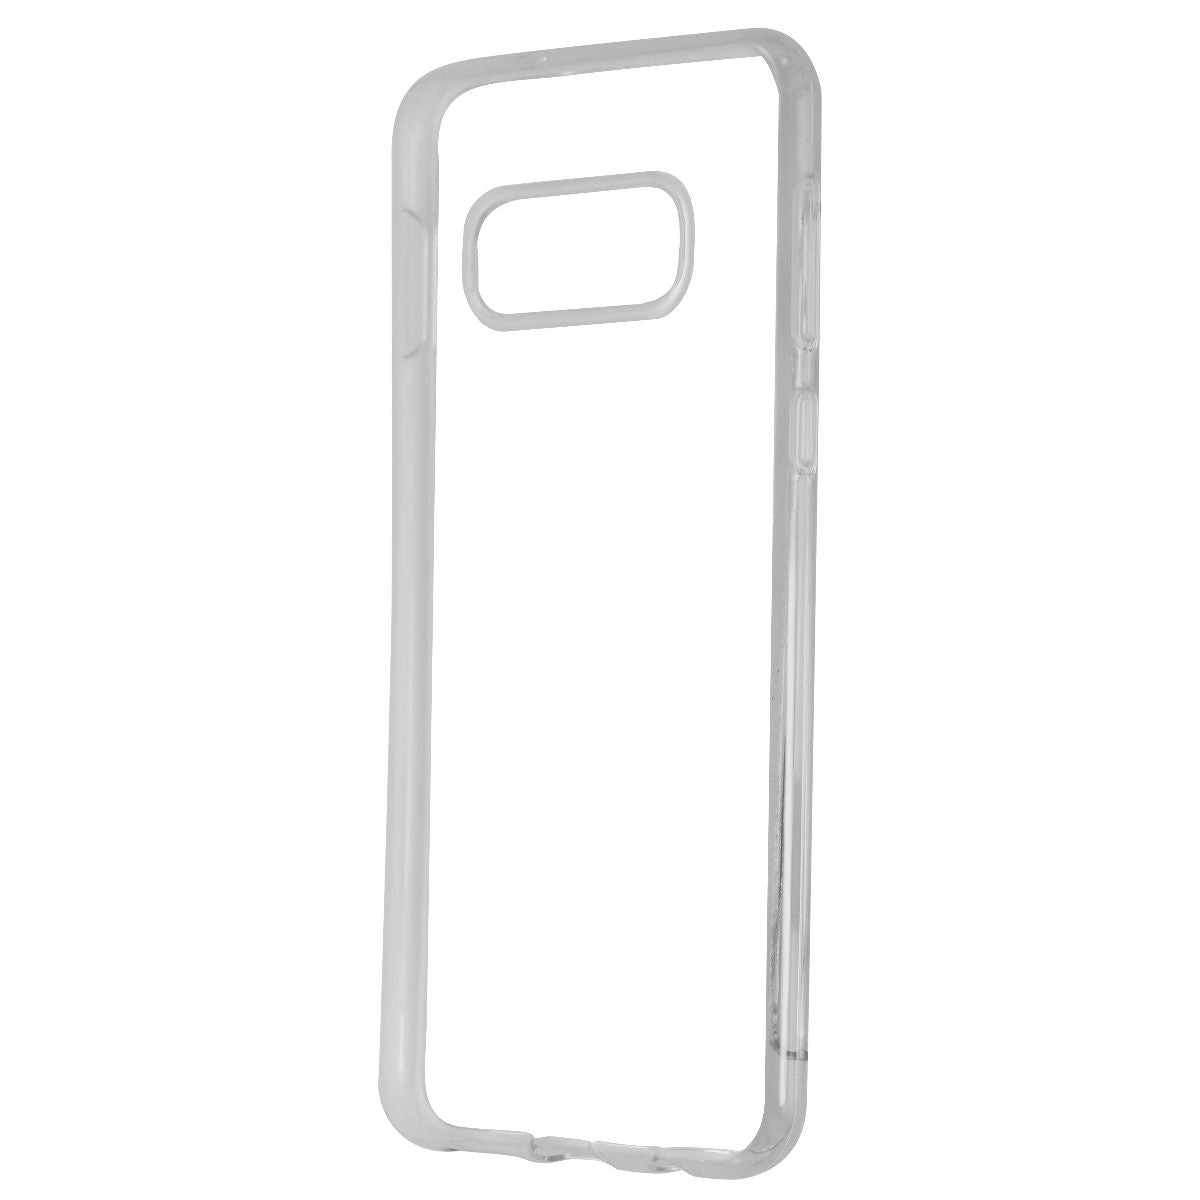 Key Soft Case Series Case for Samsung Galaxy S10e - Clear Cell Phone - Cases, Covers & Skins Key    - Simple Cell Bulk Wholesale Pricing - USA Seller